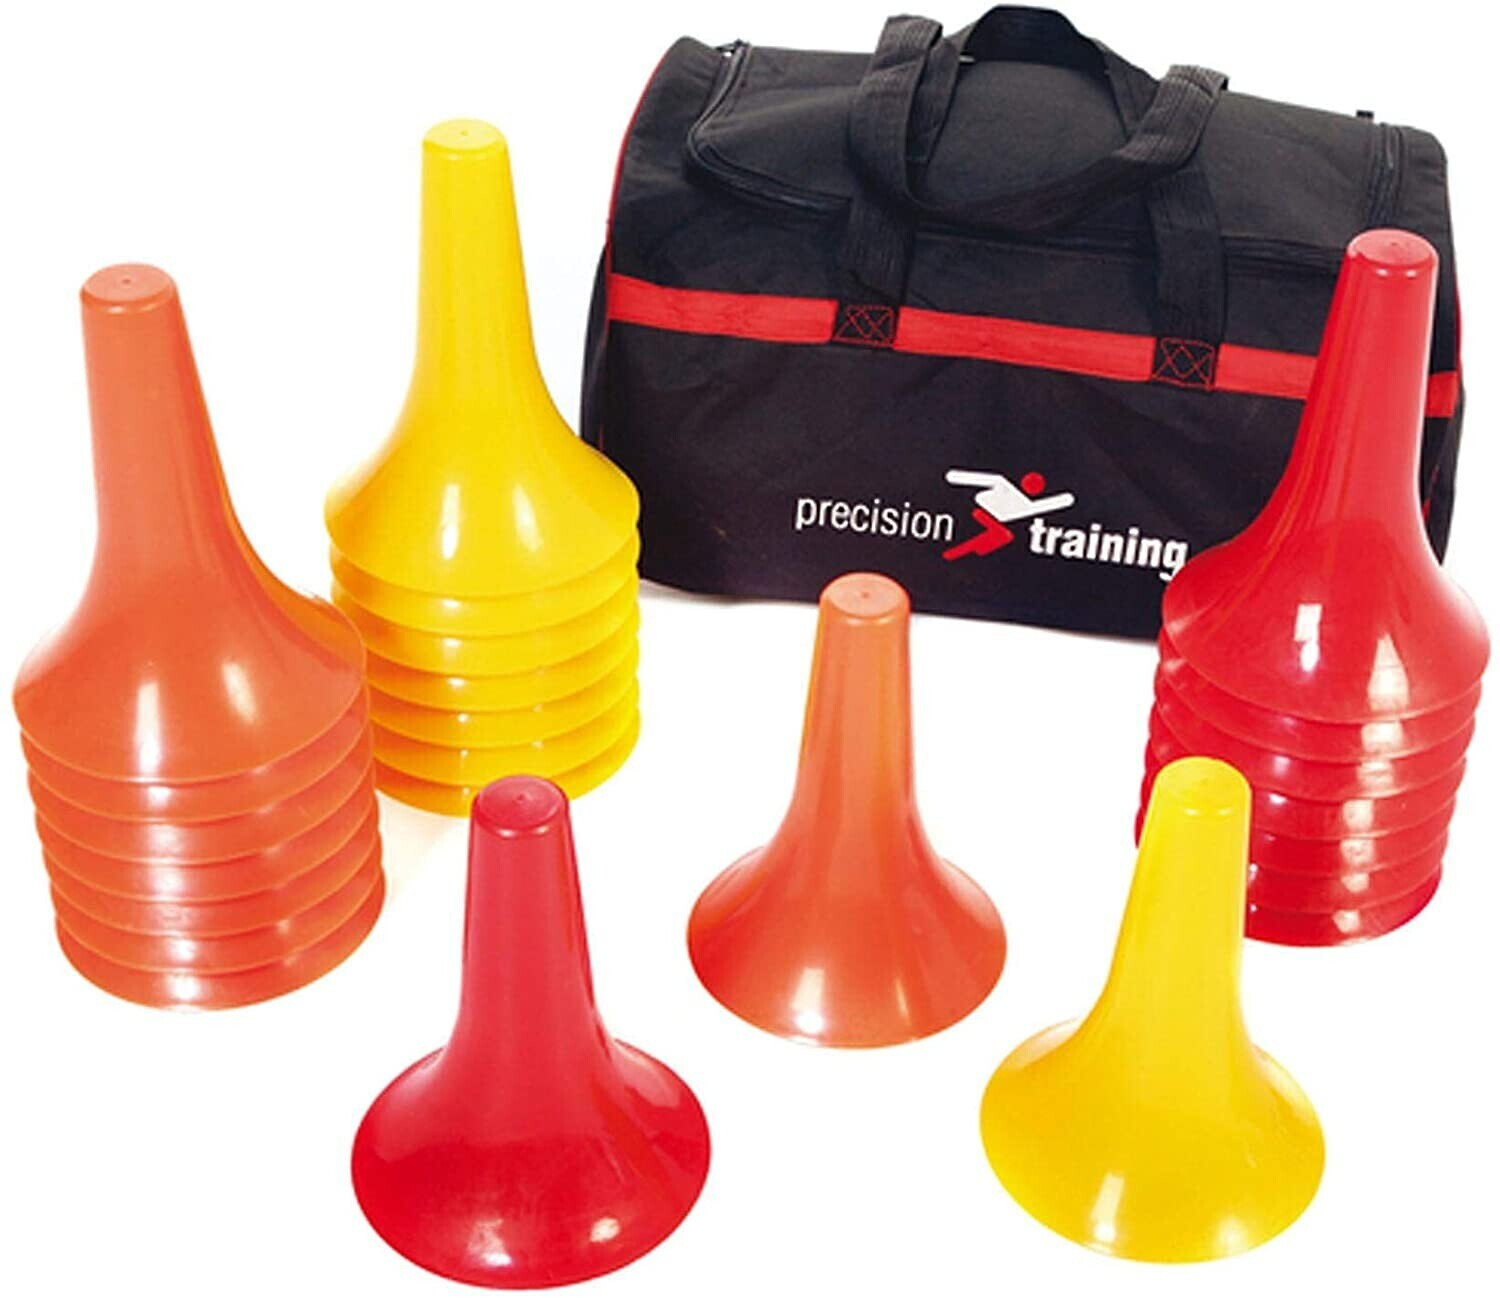 Buy Precision Training Cone Drill Footbal Training Set from £21.35